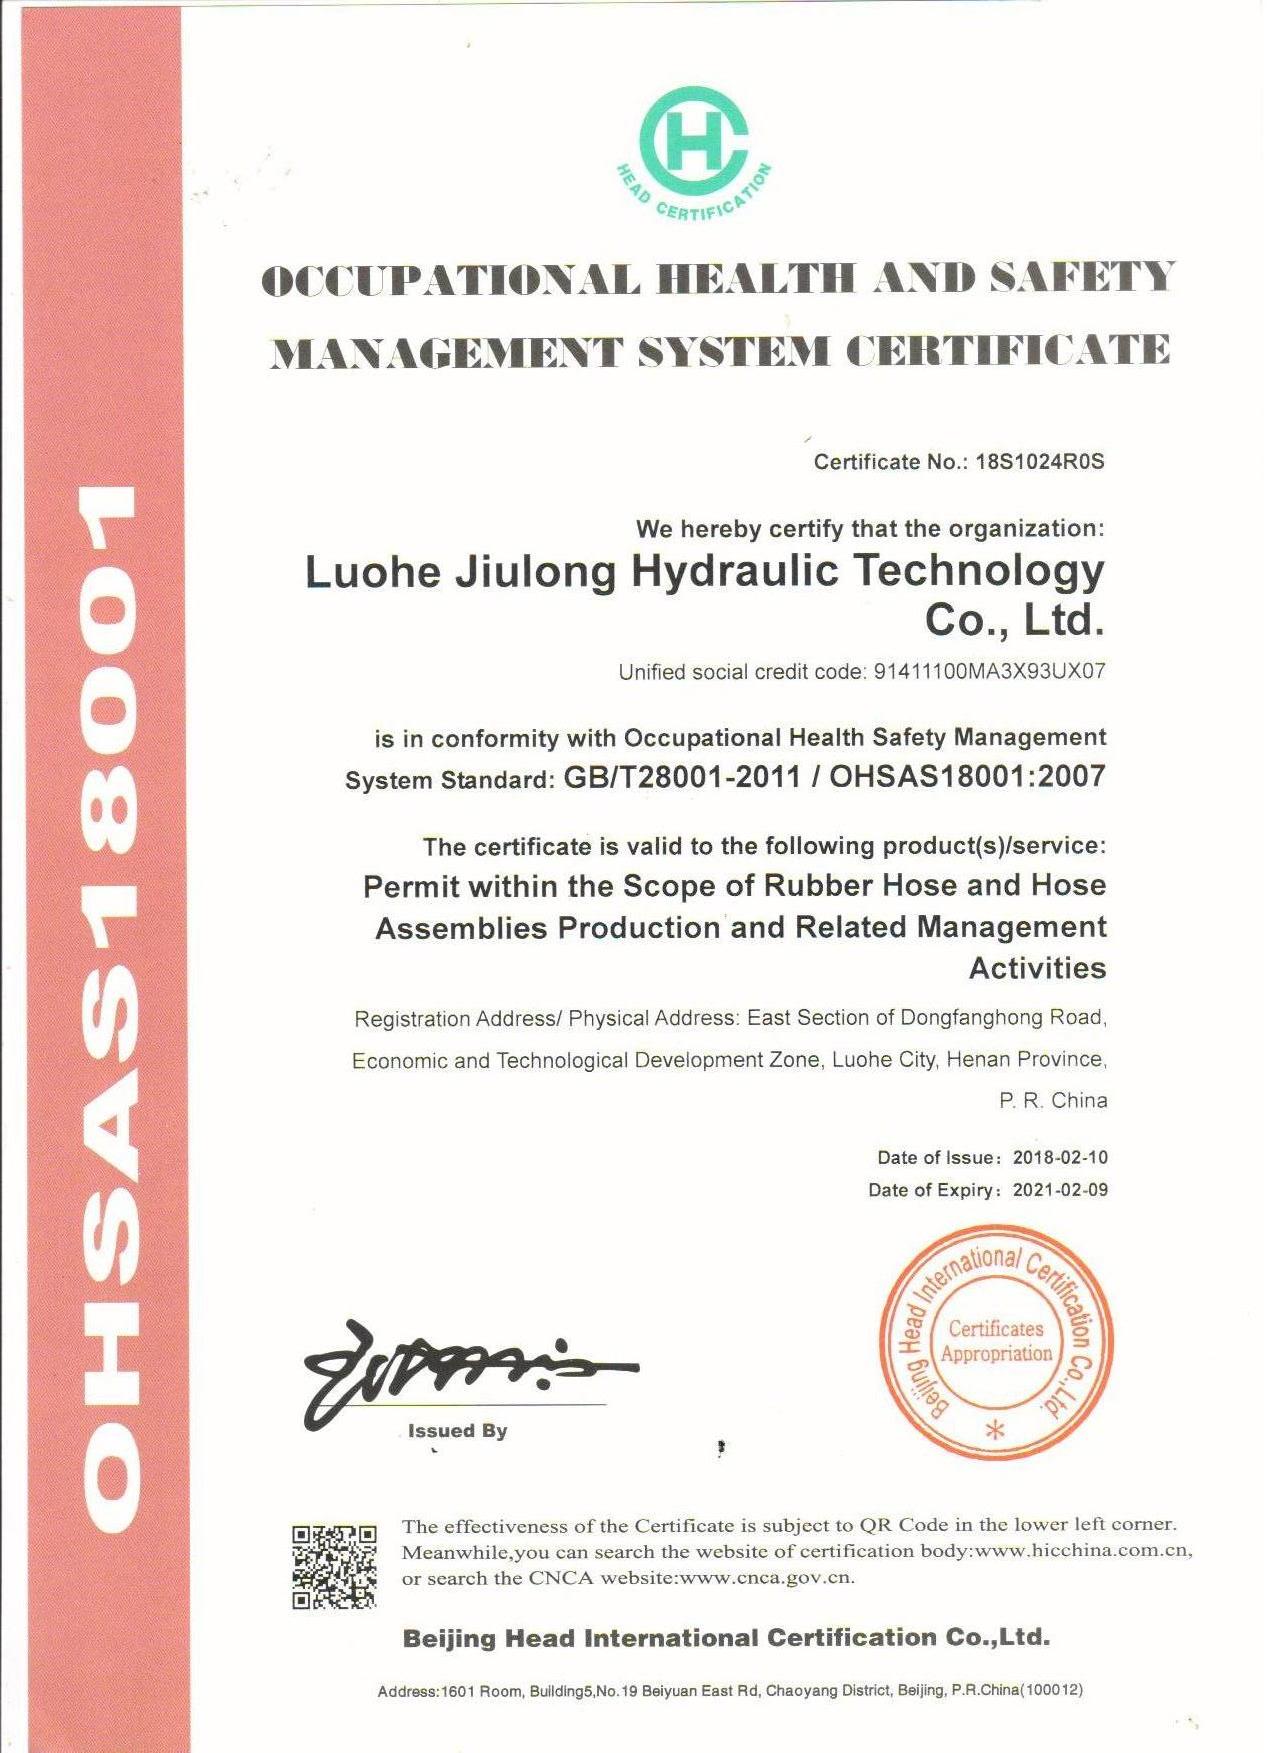 OCCUPATIONAL HEALTH AND SAFETY